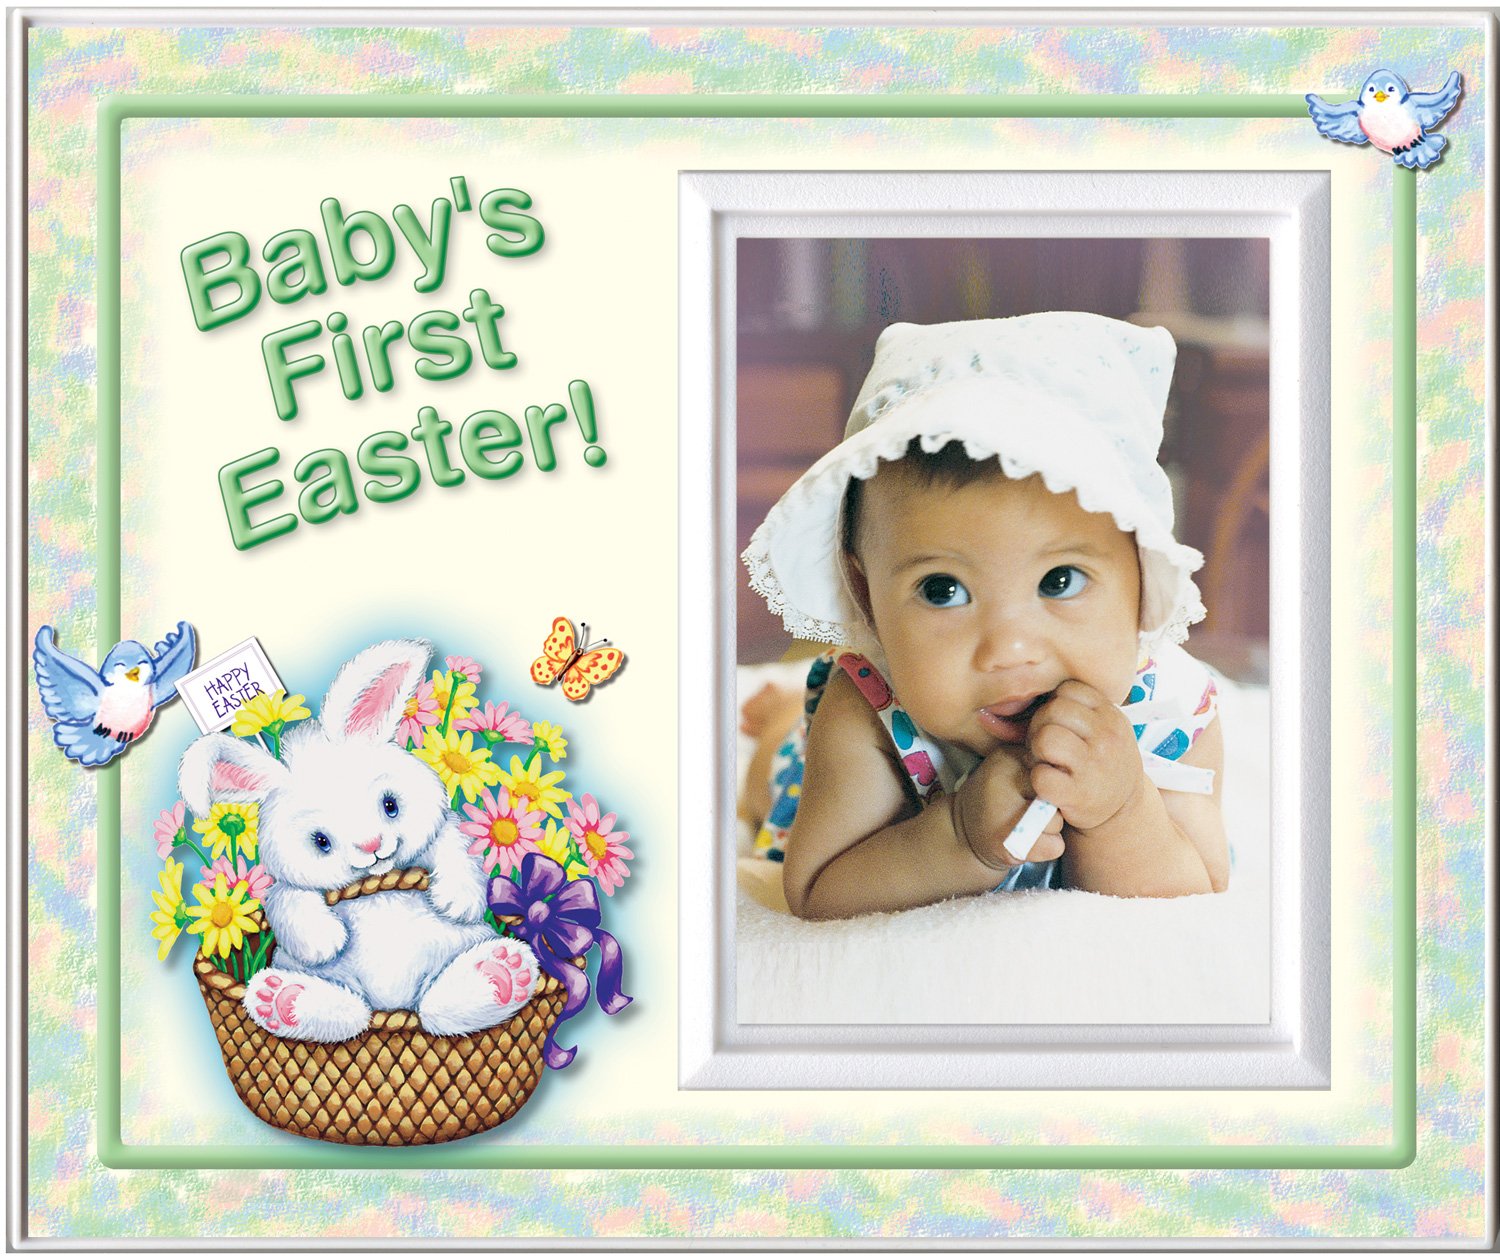 Babys Easter Bunny Frame. Bright & Colorful Spring Picture Frame For My First Easter Frame. Frame Measures 8.25 X 7 And Holds 3.5 X 5 Photo. Iinnovative Front Load Photo